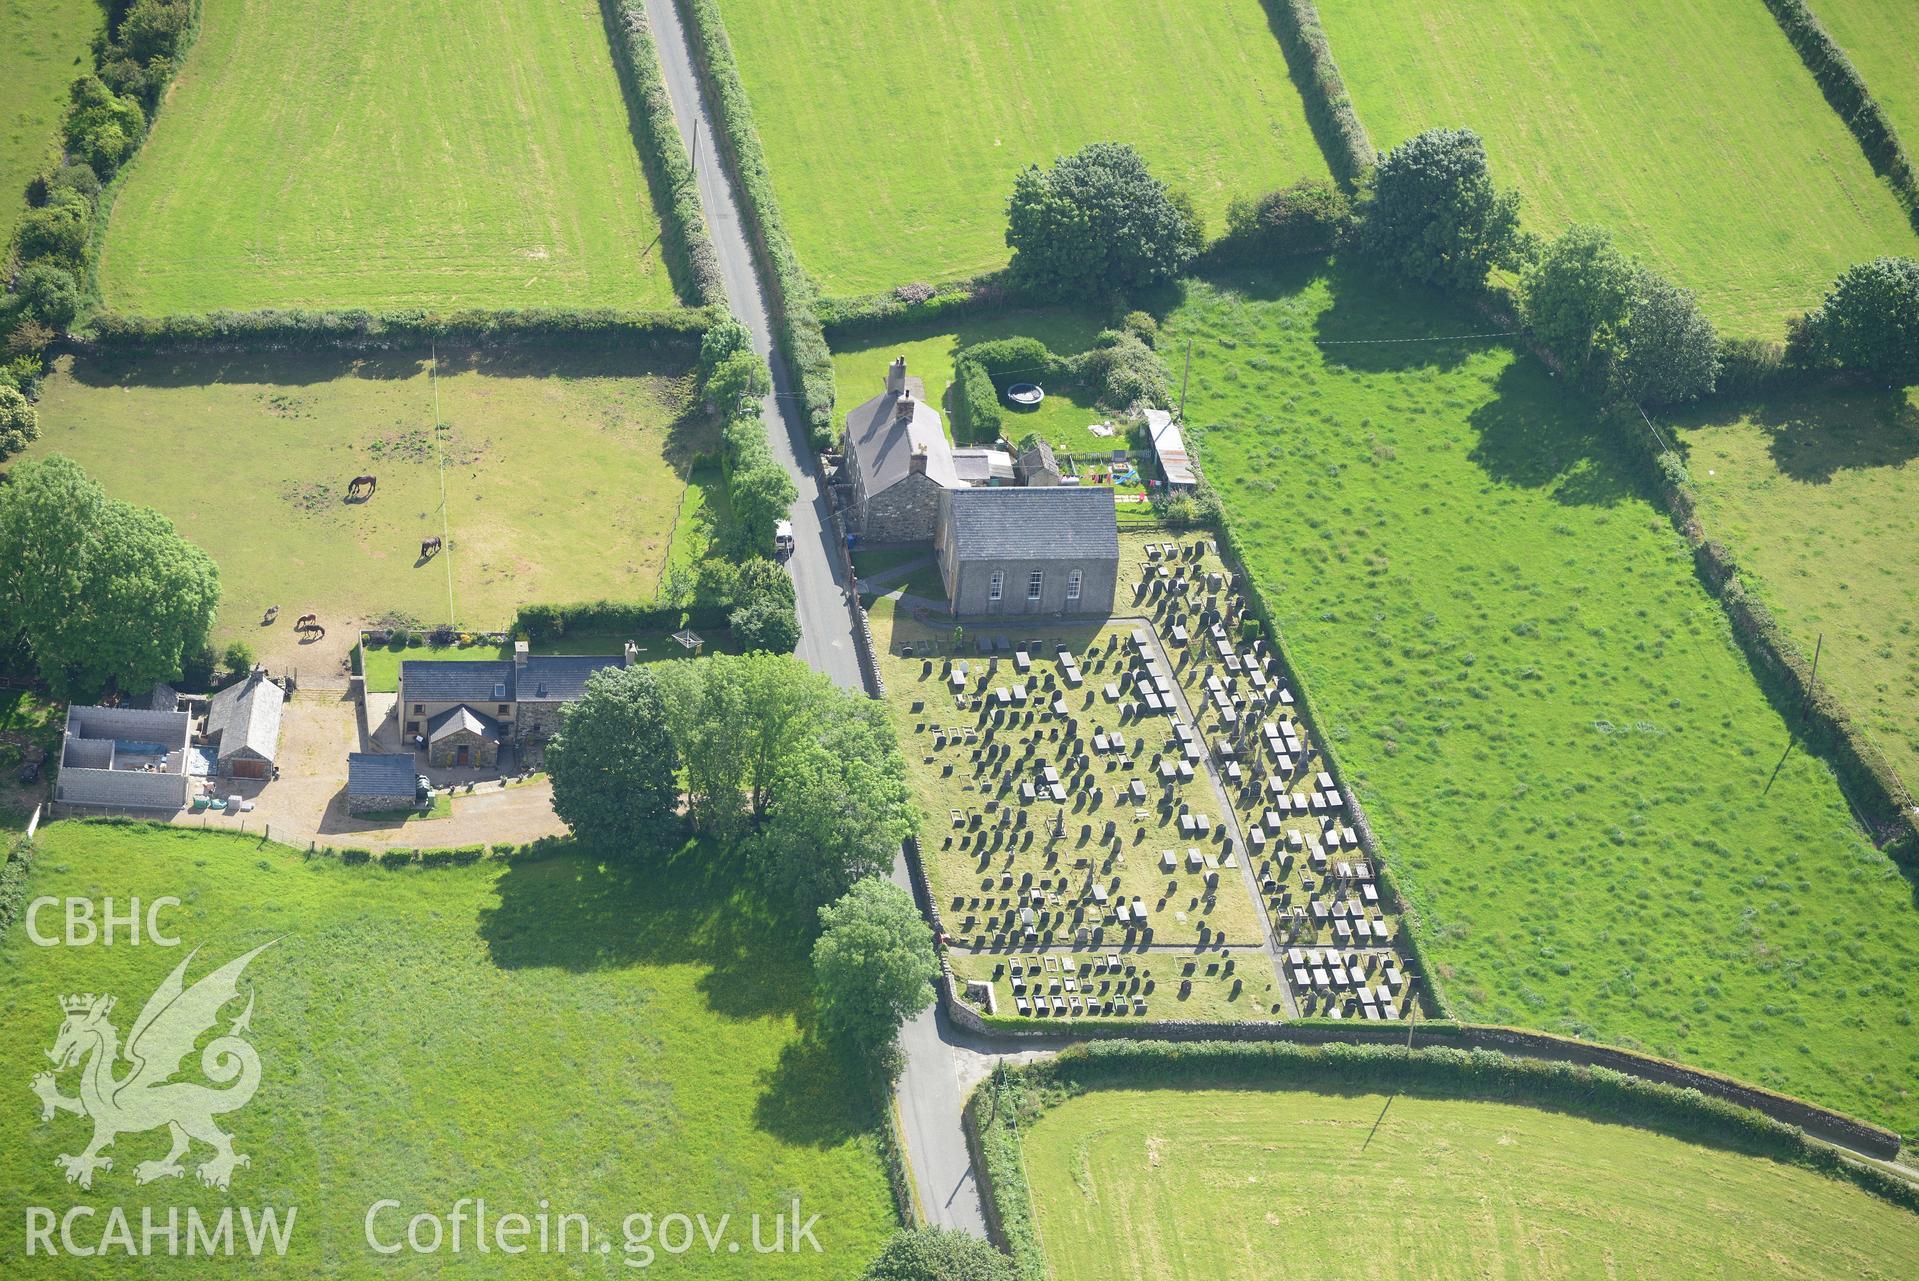 Capel Helyg Welsh Independent Chapel, Llangybi. Oblique aerial photograph taken during the Royal Commission's programme of archaeological aerial reconnaissance by Toby Driver on 23rd June 2015.